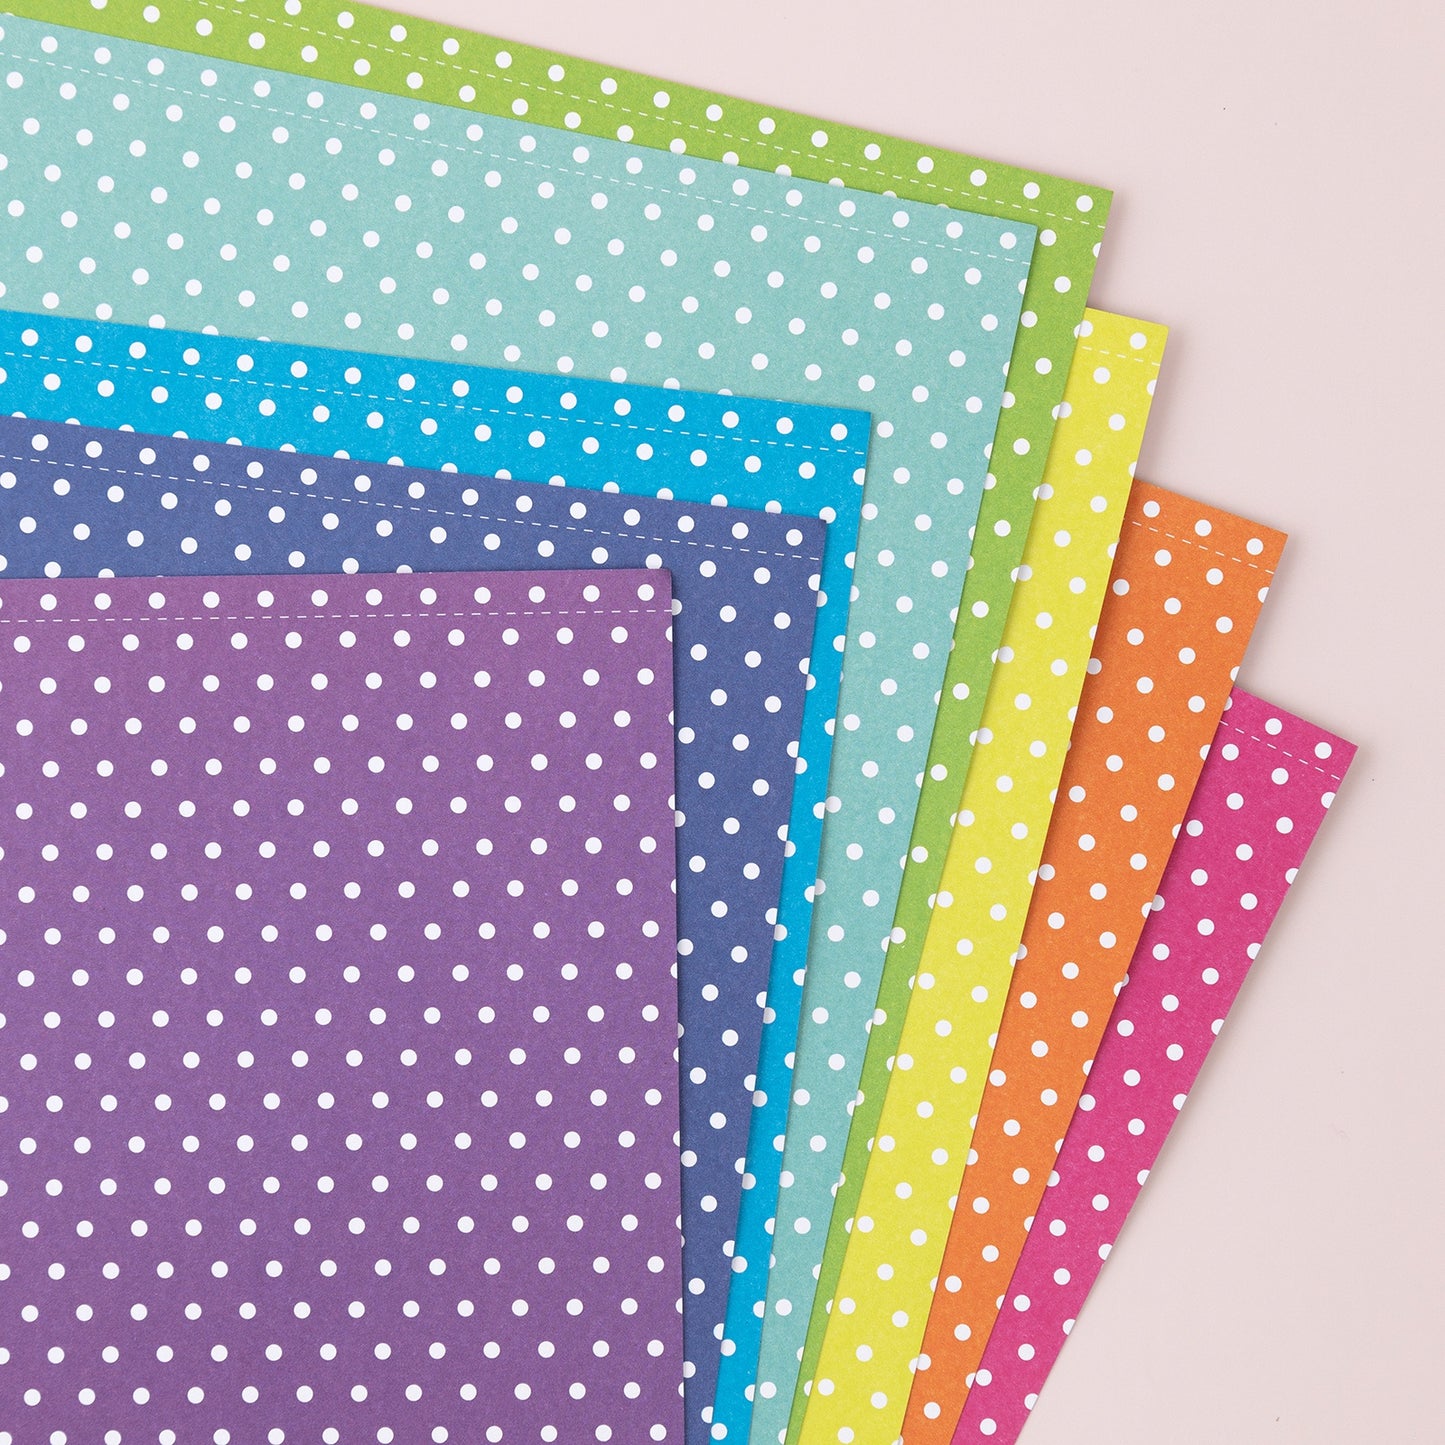 Colorbok 78lb Single-Sided Printed Cardstock 12"X12" 30/Pkg-Bright Spots, 6 Colors/5 Each